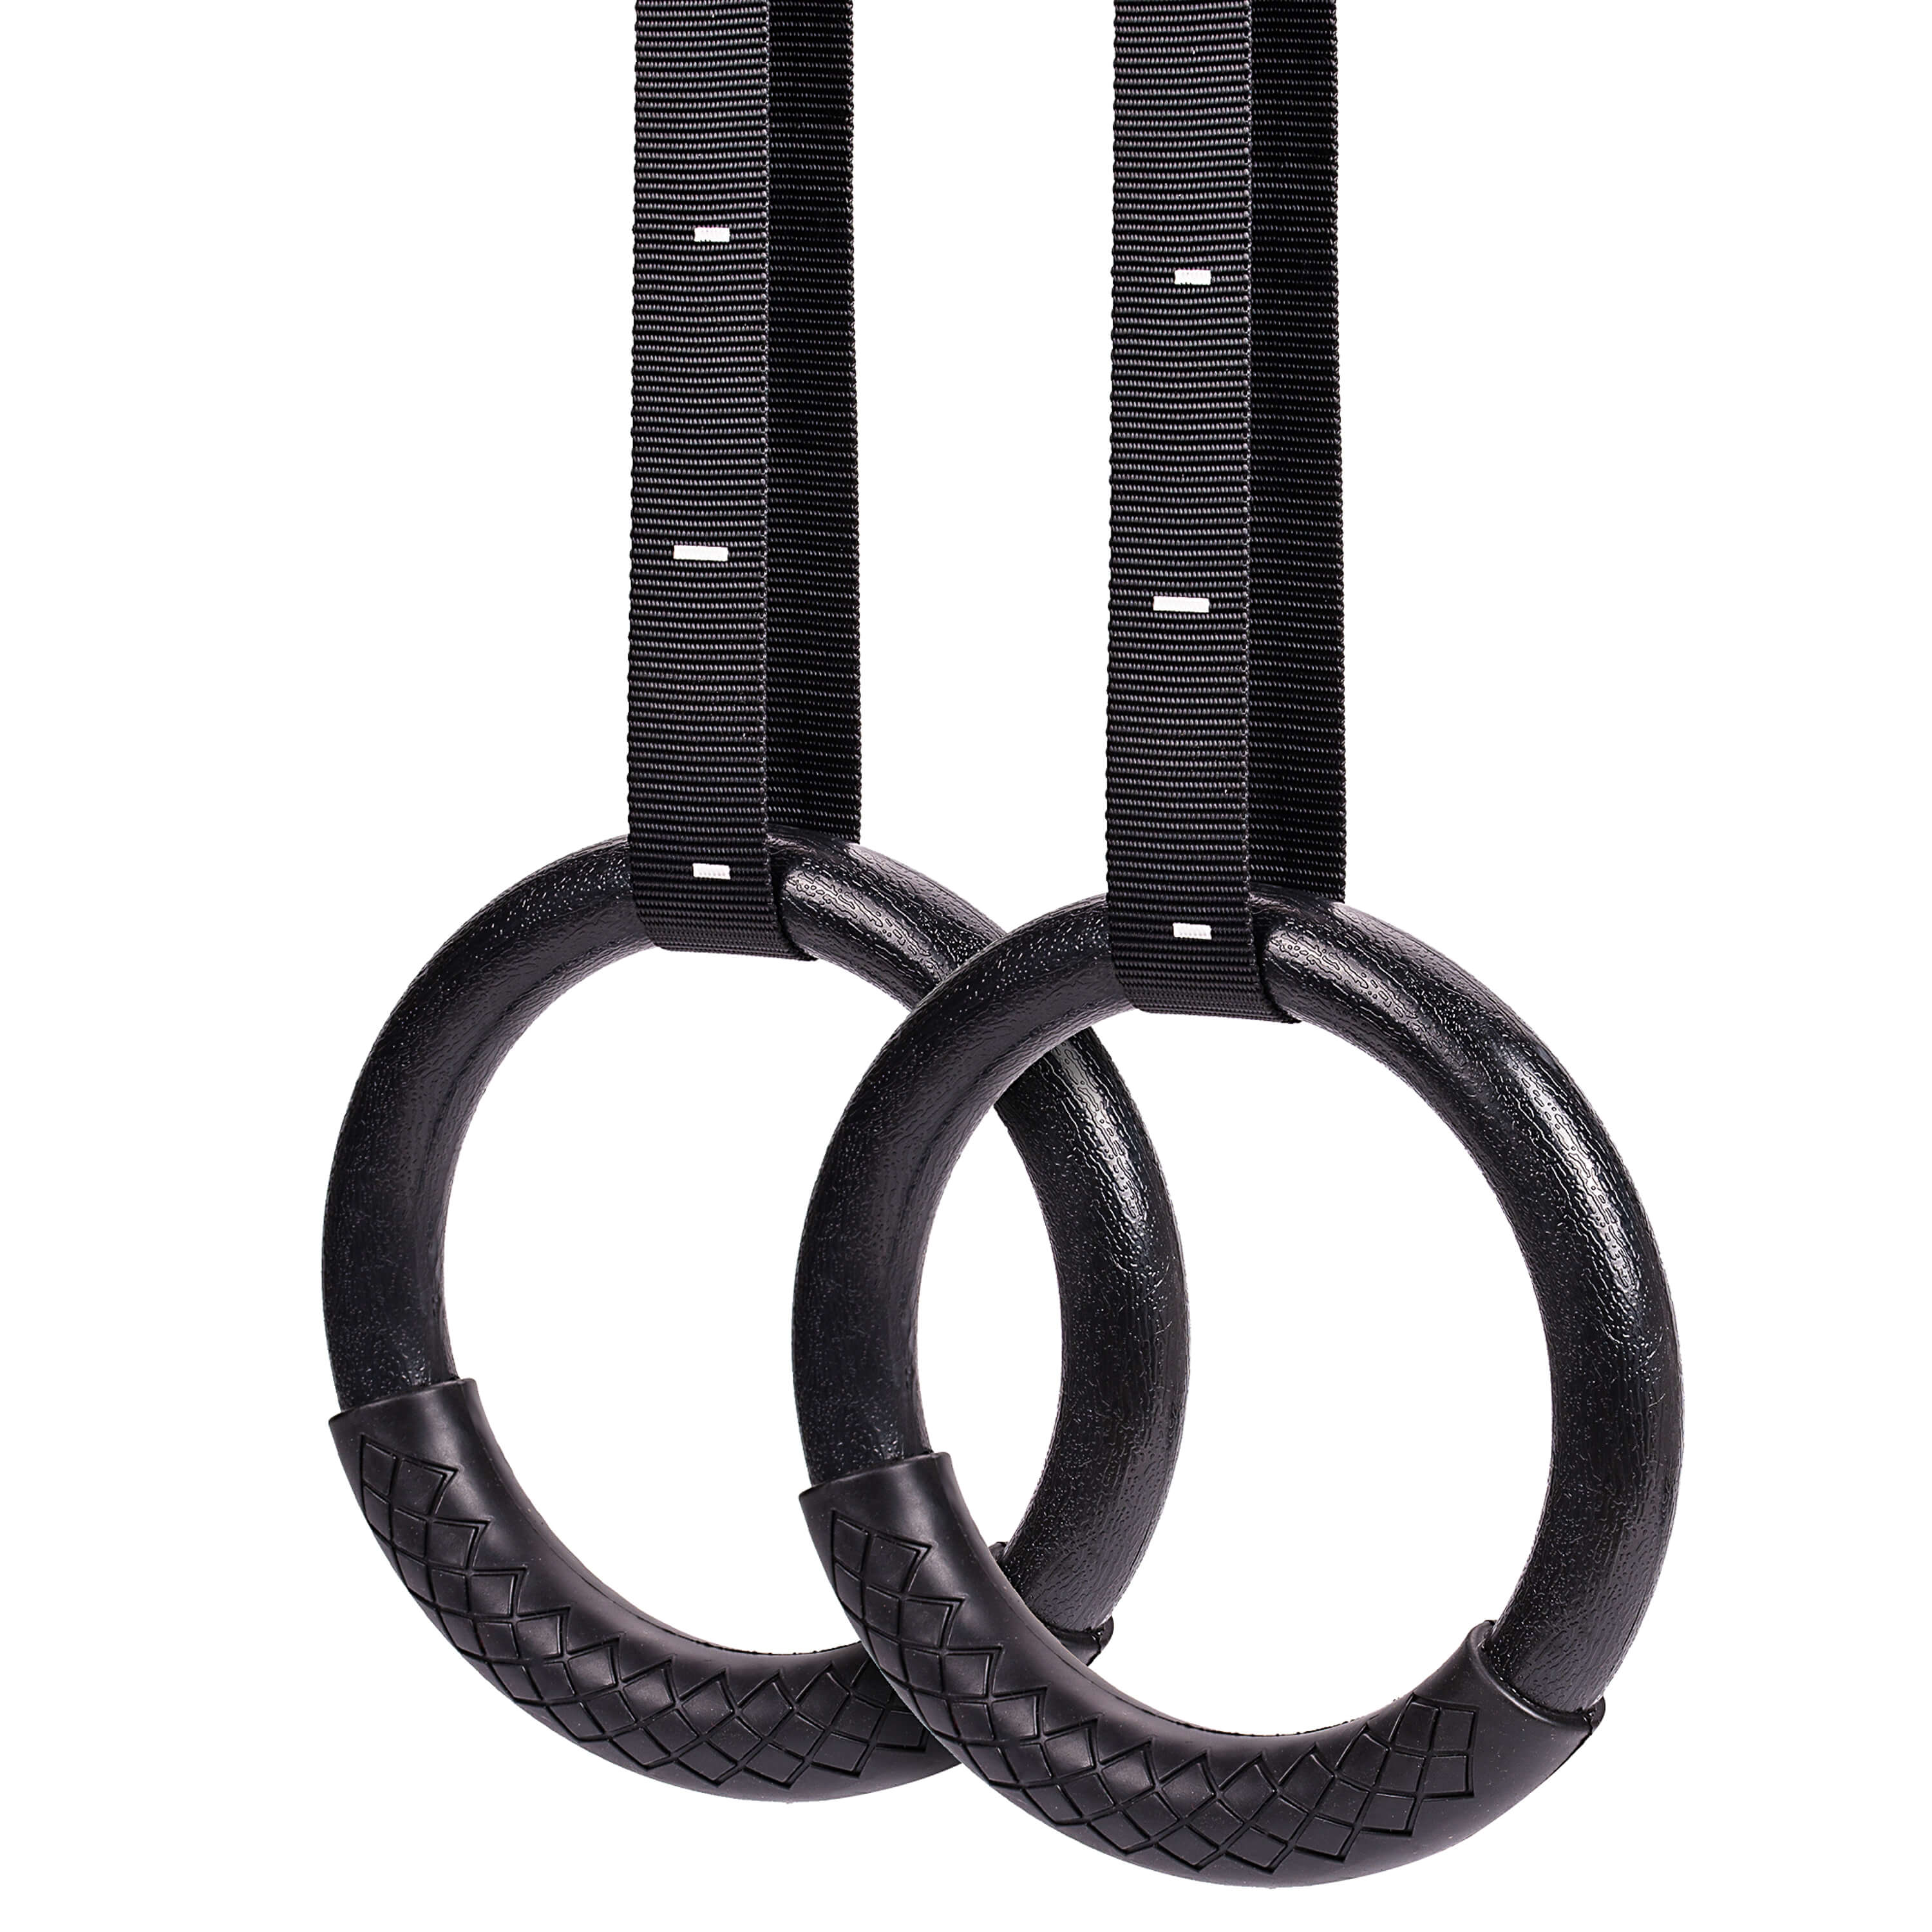 Waterproof gym rings with numbered straps by Atomic Iron